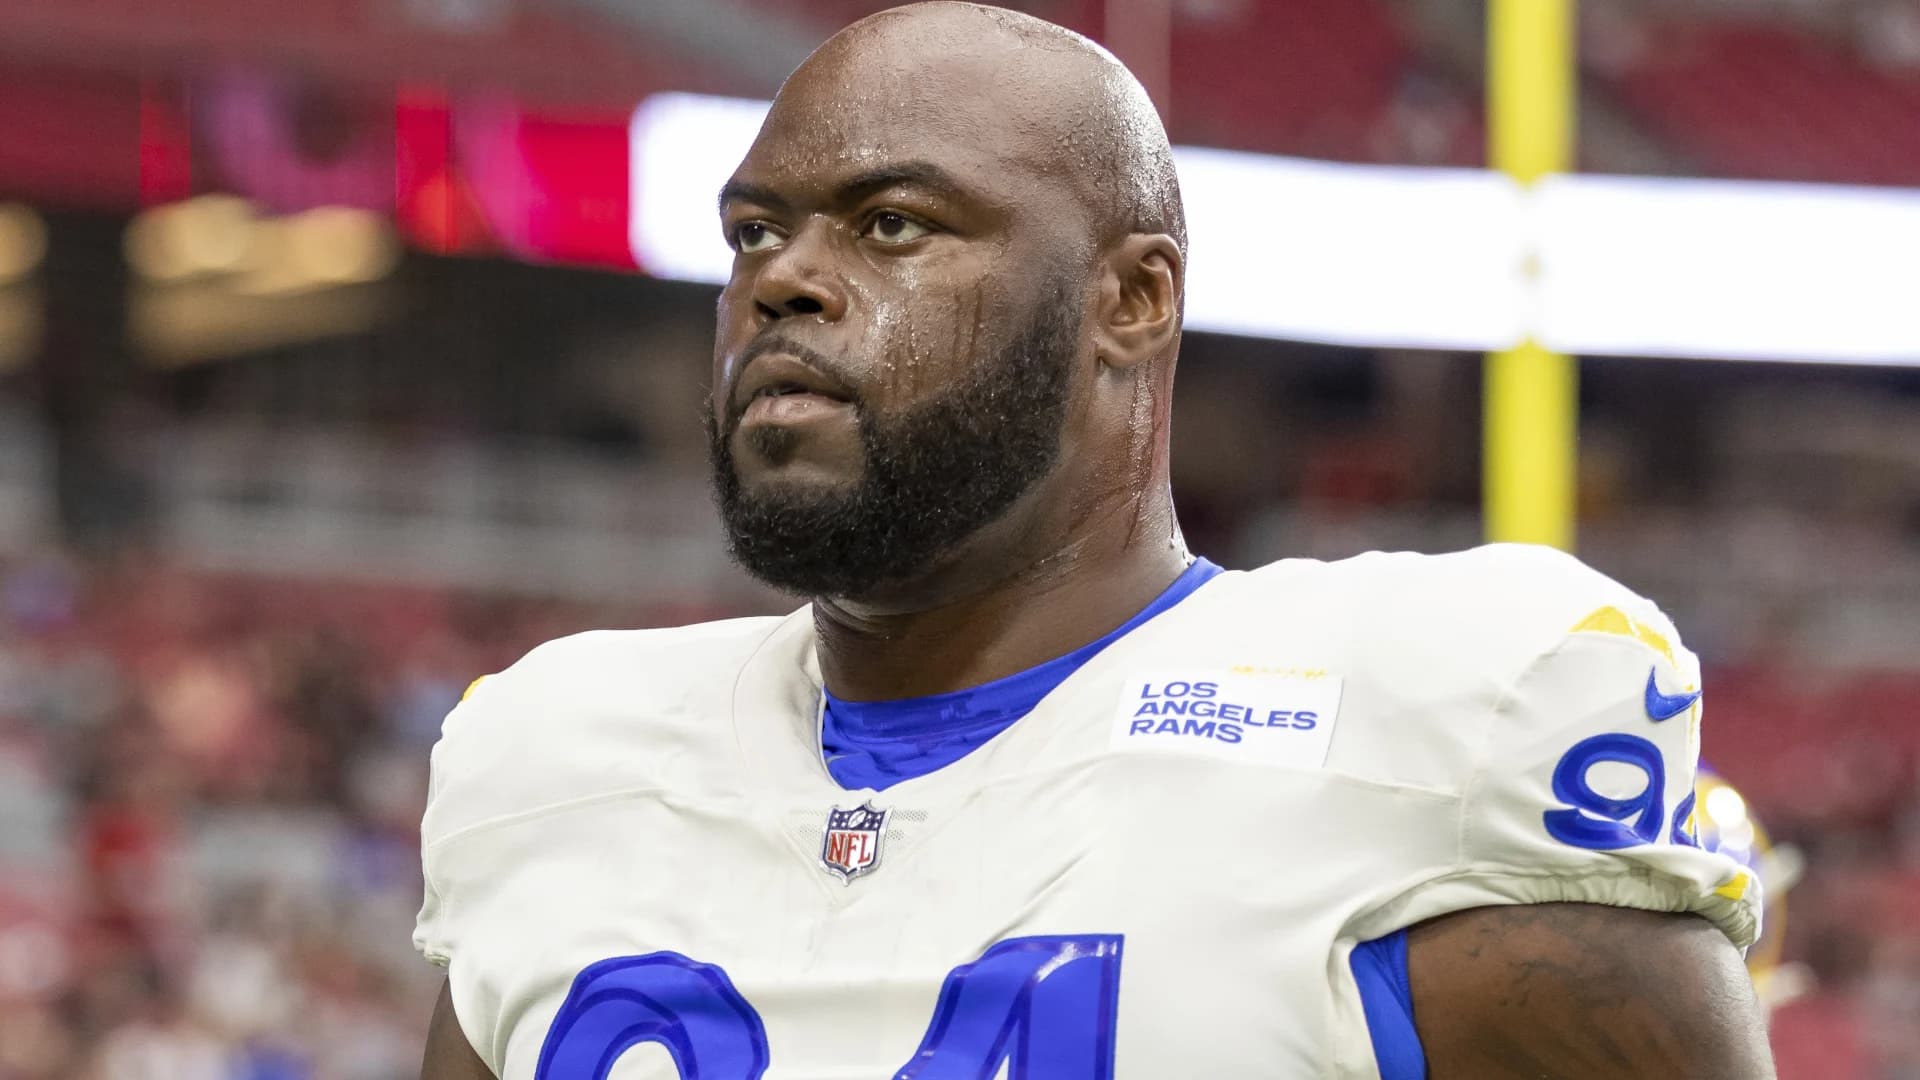 Giants sign DT A’Shawn Robinson days before NFL draft